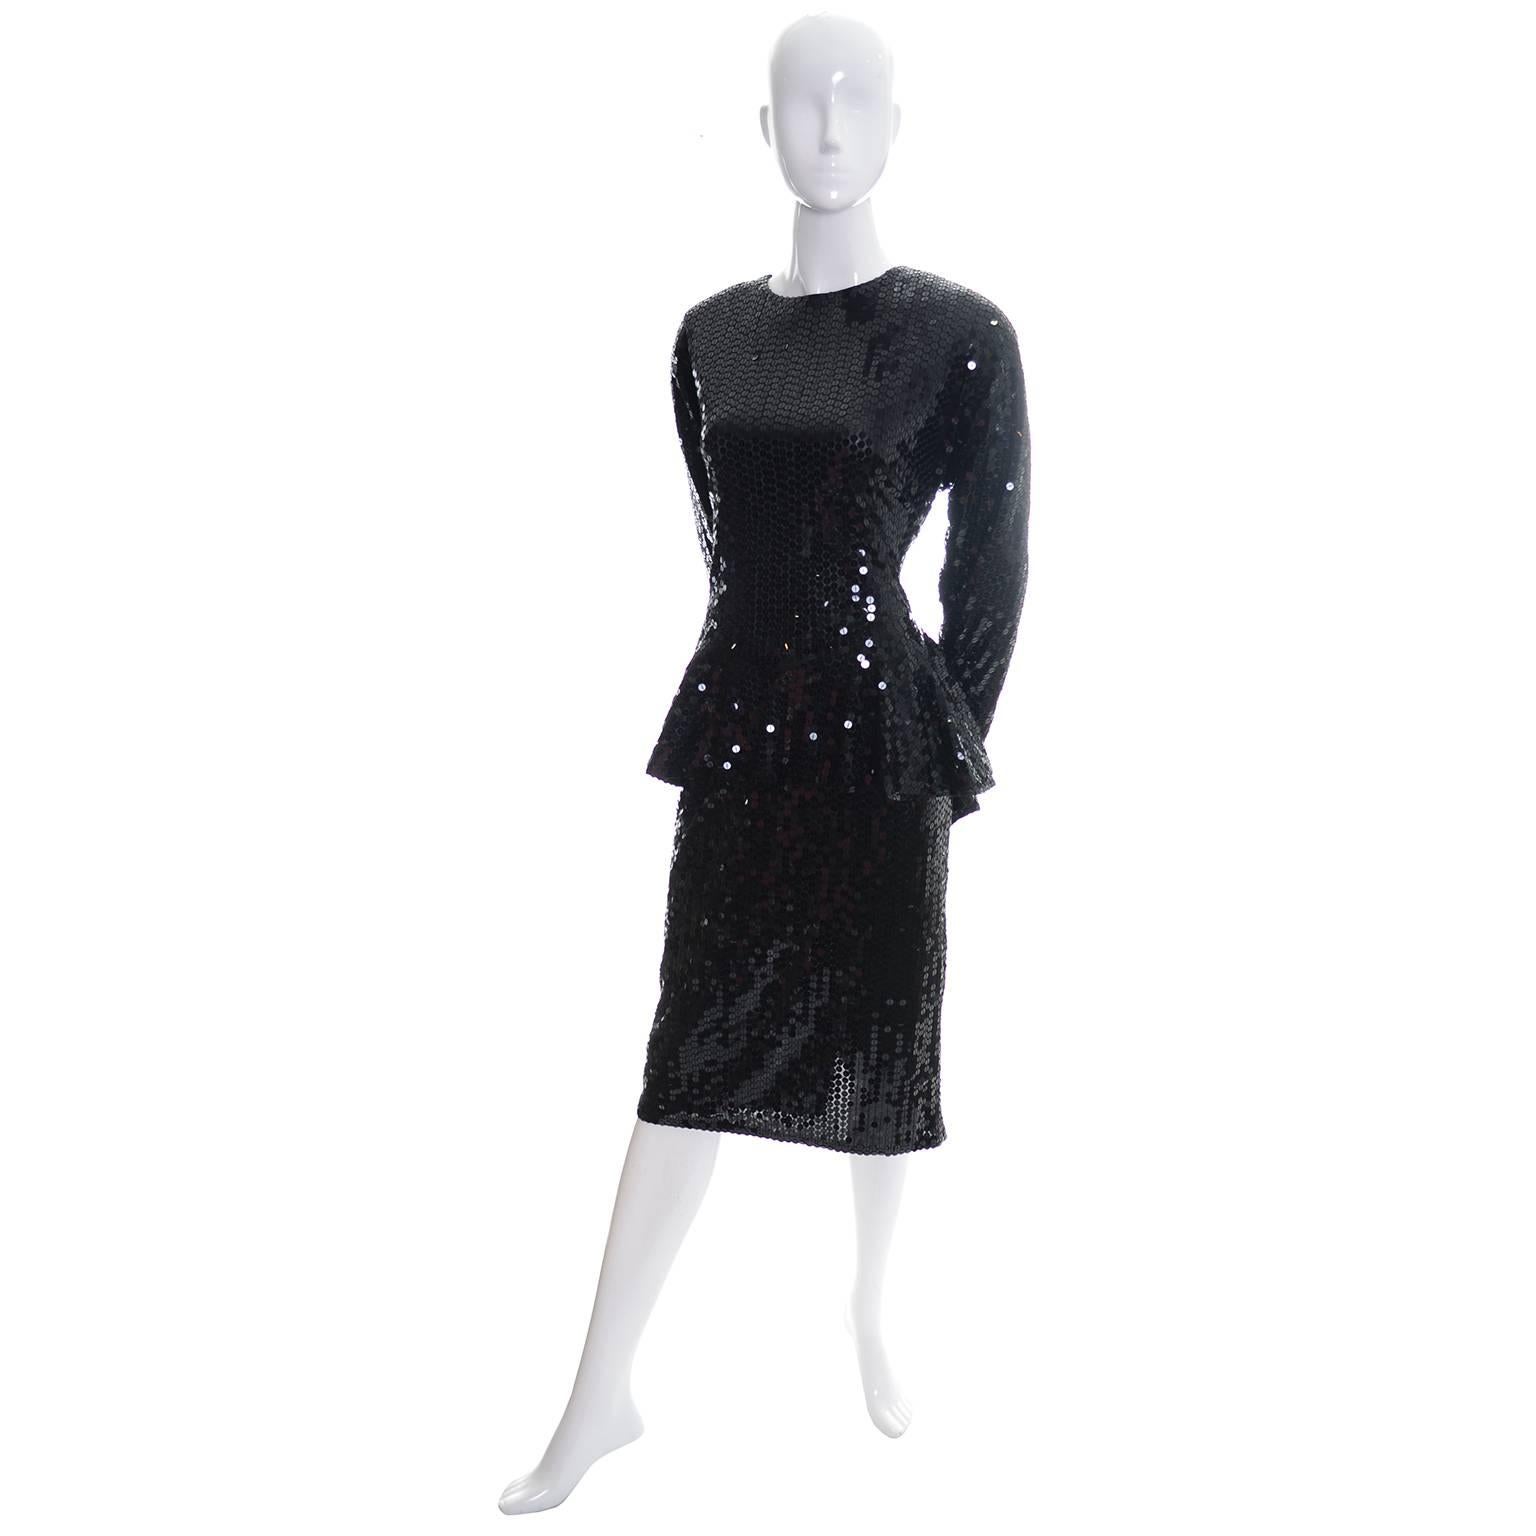 This Lillie Rubin vintage party or cocktail dress is from the 1980's and is covered in black sequins.  The dress is lined with a back zipper and fabulous peplum.  We would estimate this dress to be a size 8/10 but encourage you to used the